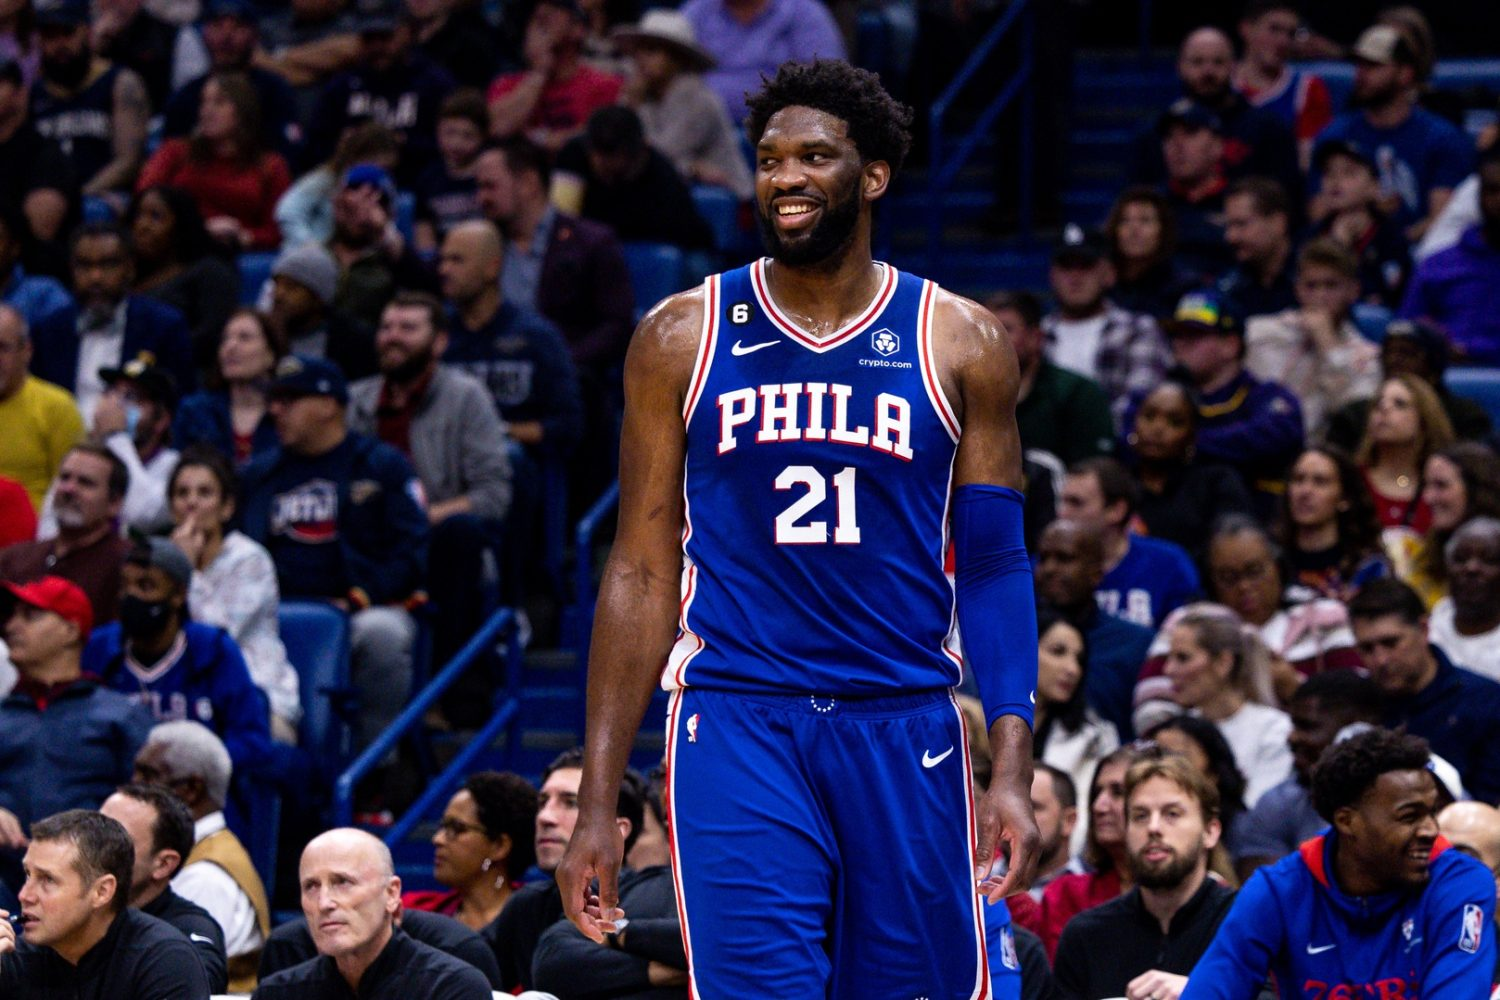 Joel Embiid's Injury Update: Why He's Missing the All-Star Game and What's Next for the 76ers Star